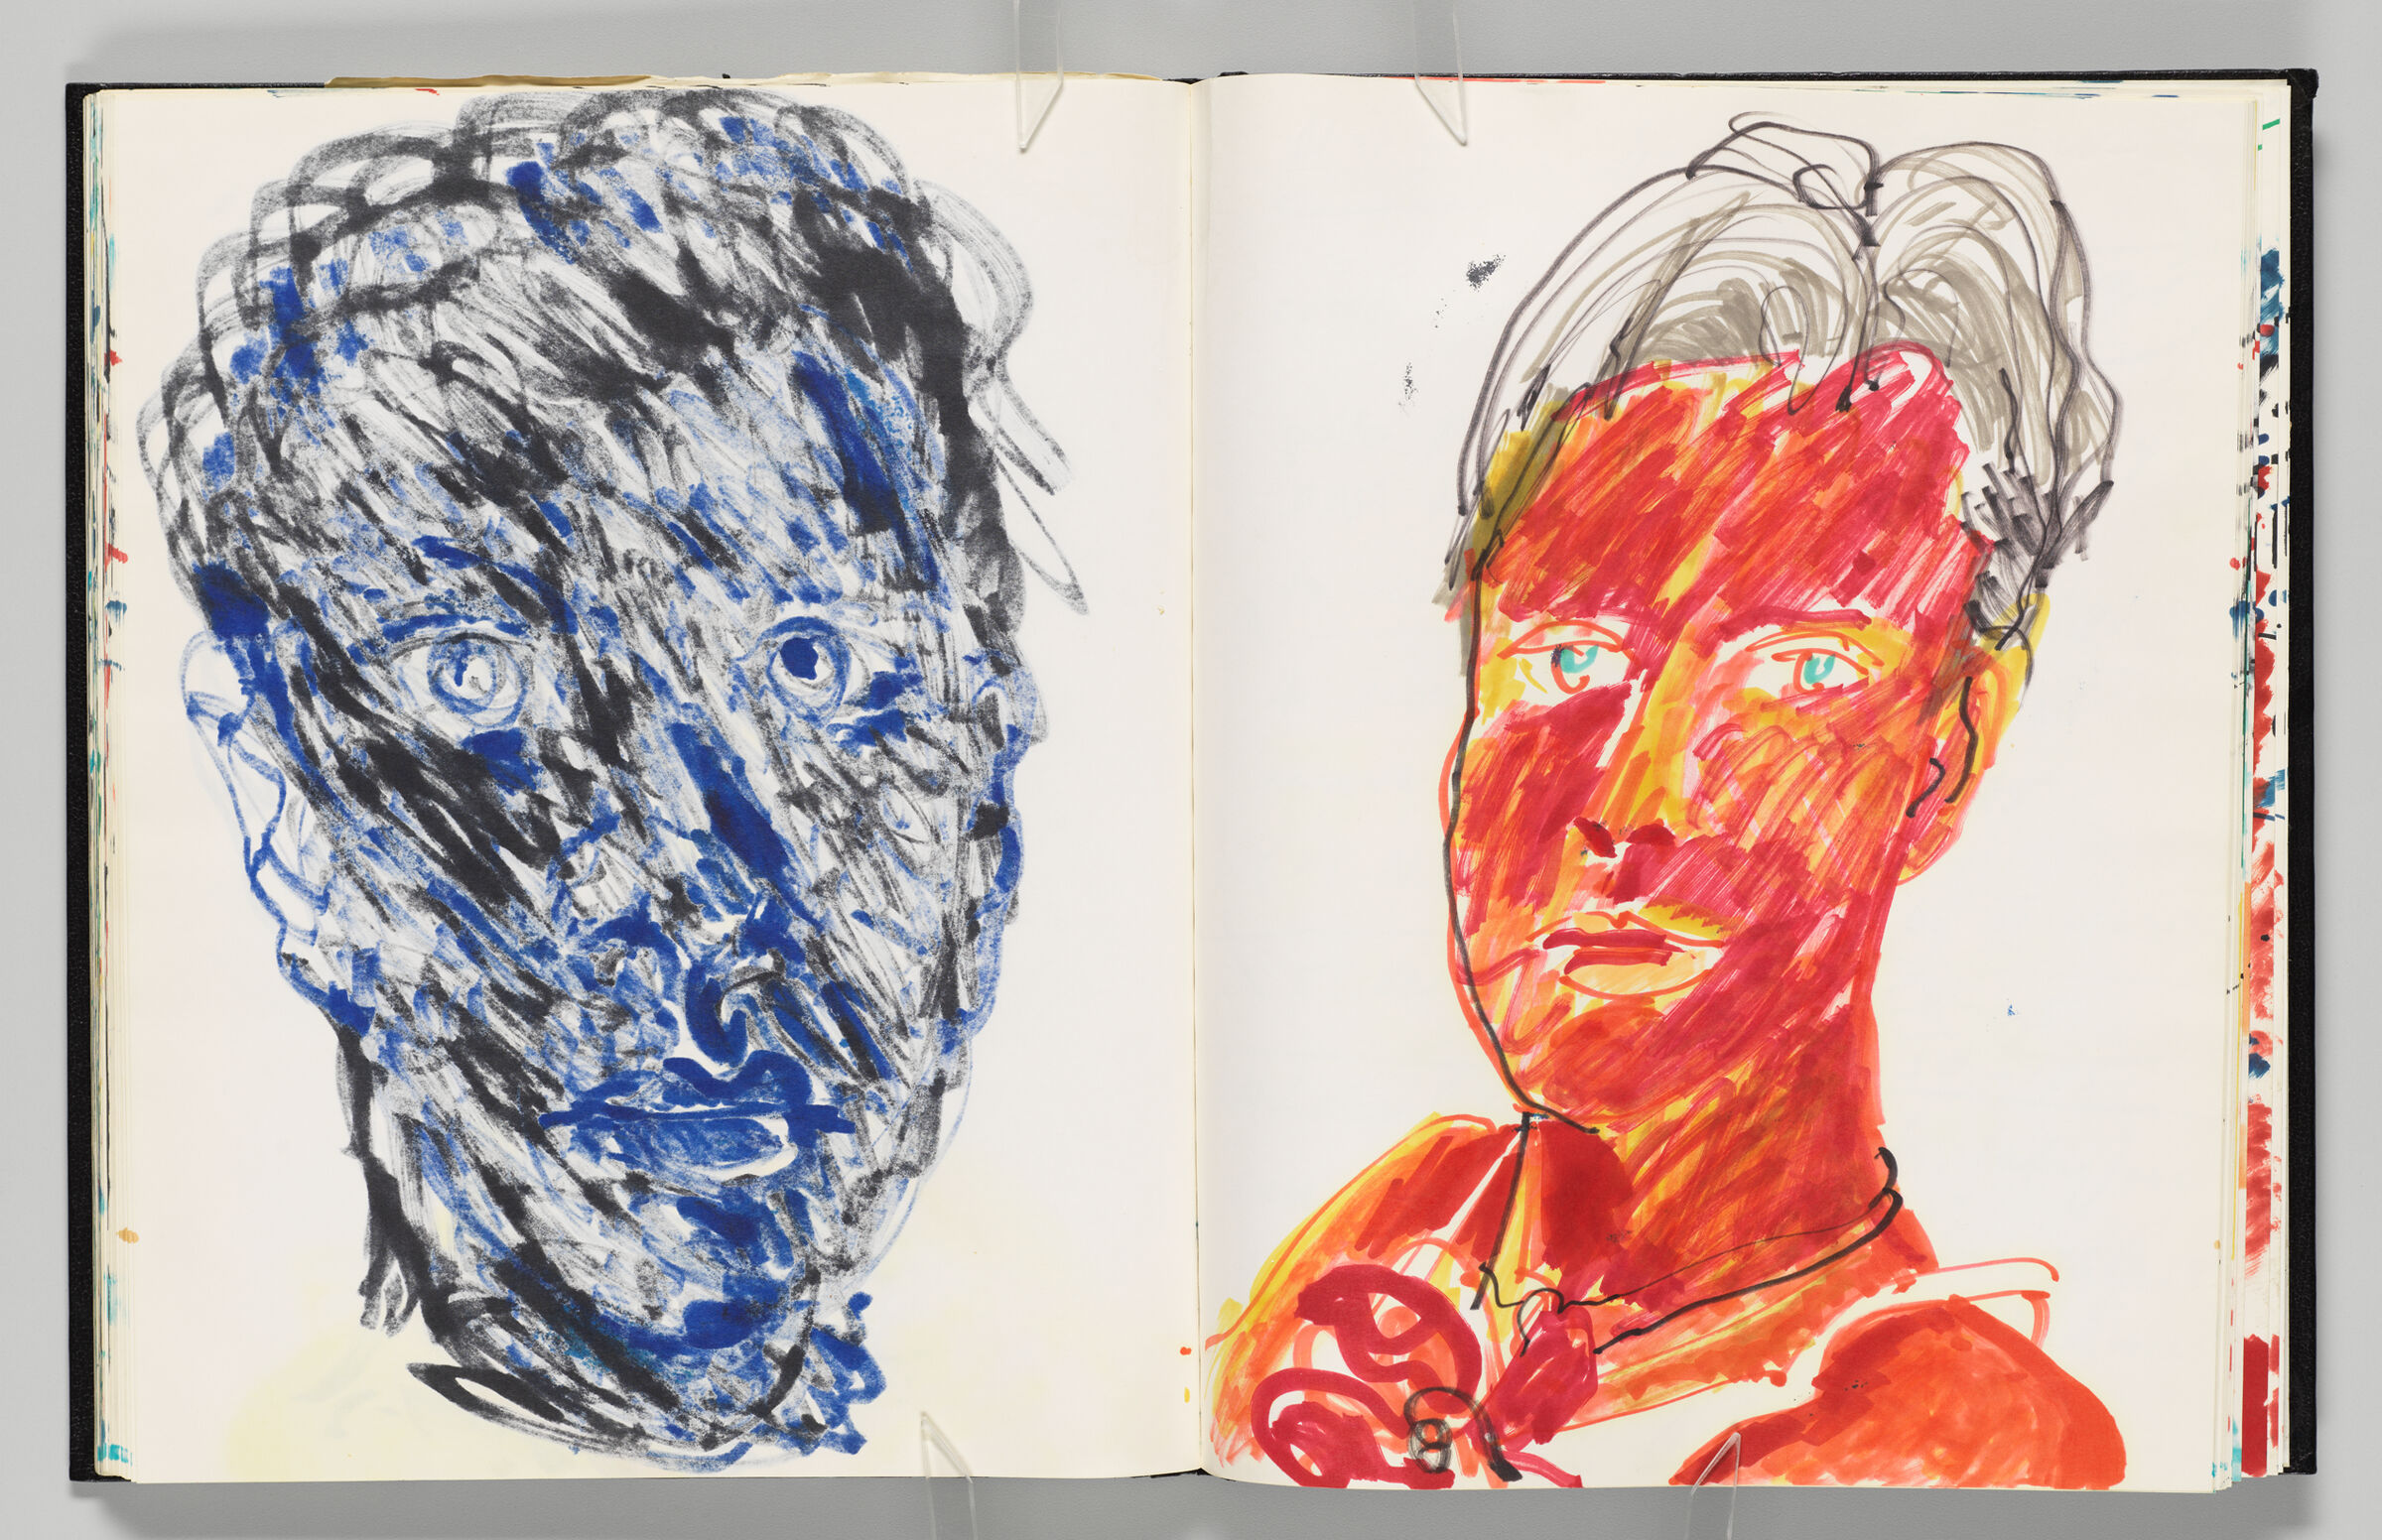 Untitled (Bleed-Through Of Previous Page, Left Page); Untitled (Portrait Of Woman With Pasted-In Note, Right Page)